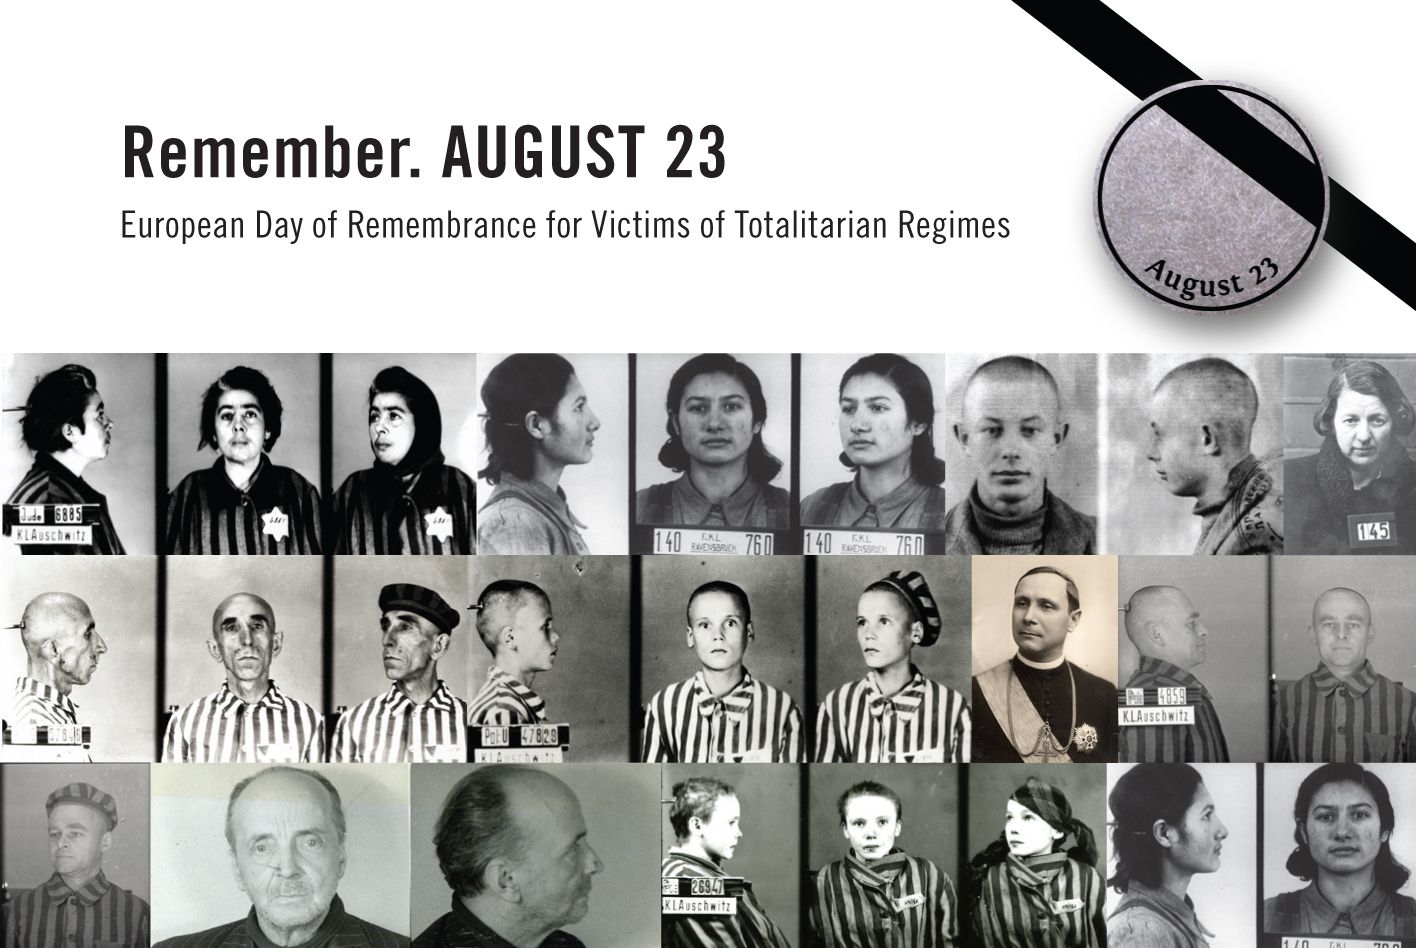 23 August – European Day of Remembrance for Victims of Totalitarian Regimes. Share a sign of remembrance!